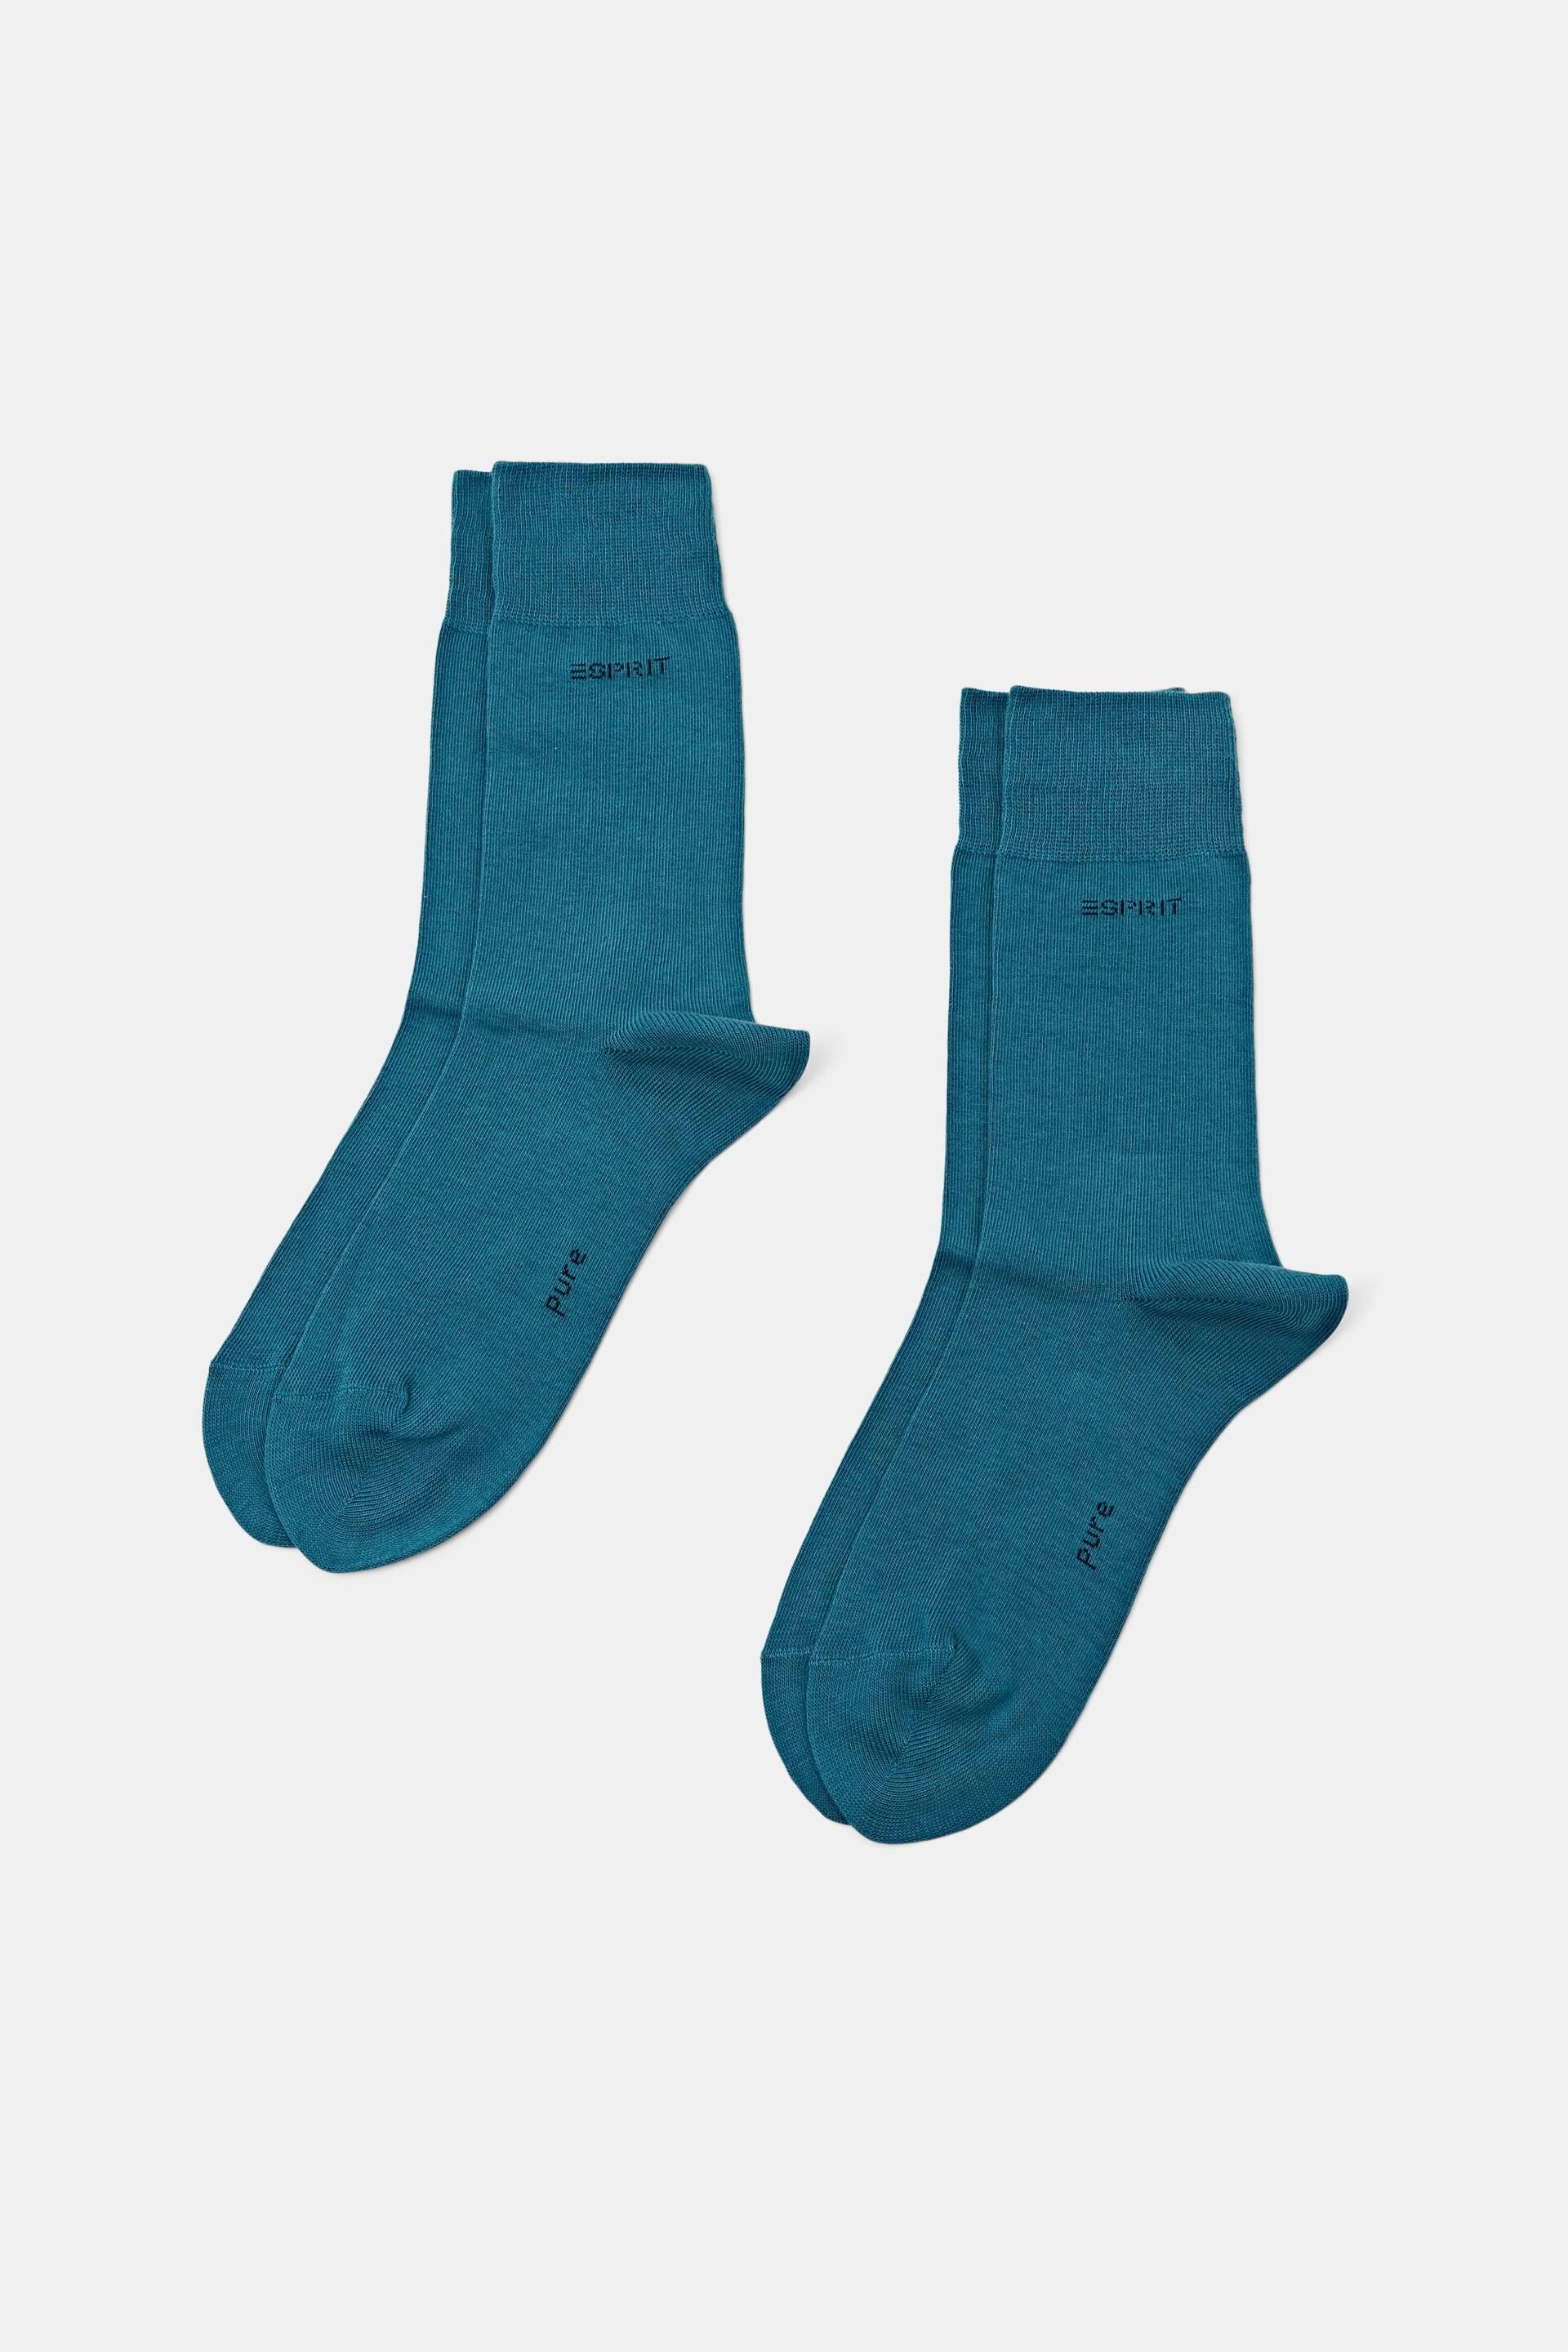 Esprit blended made cotton pack organic of Double socks